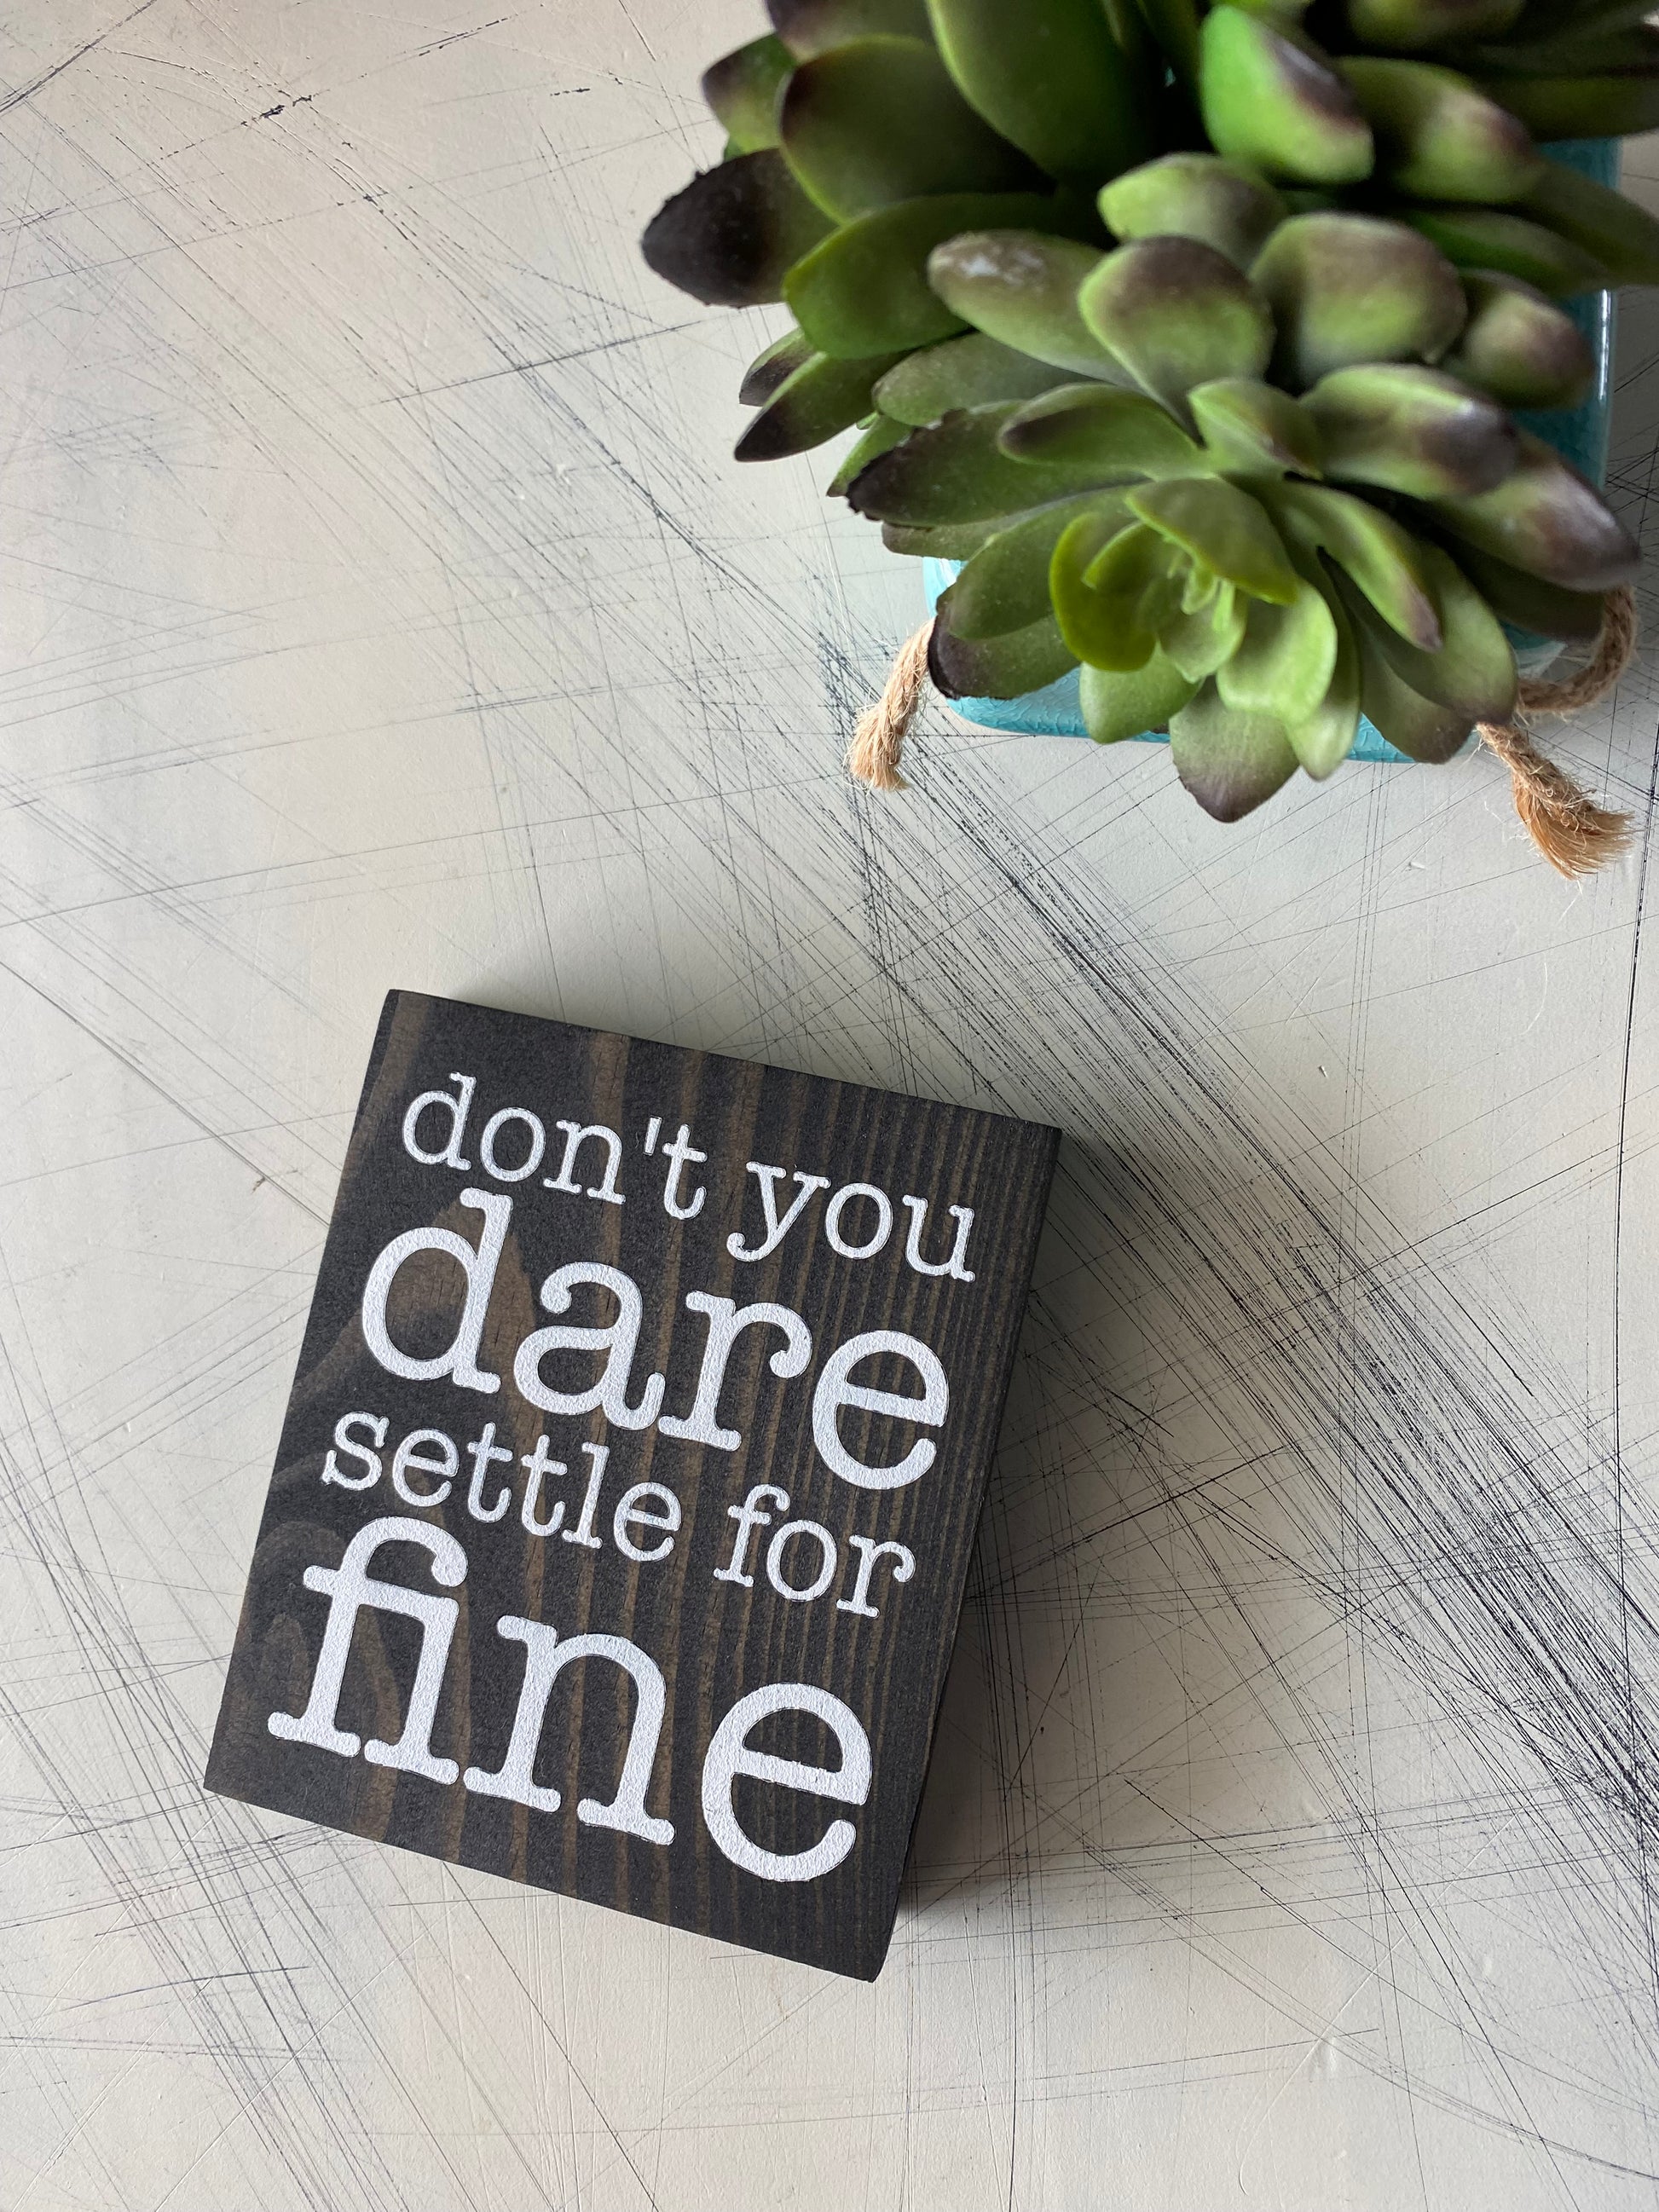 Don't you dare settle for fine - handmade mini wood sign